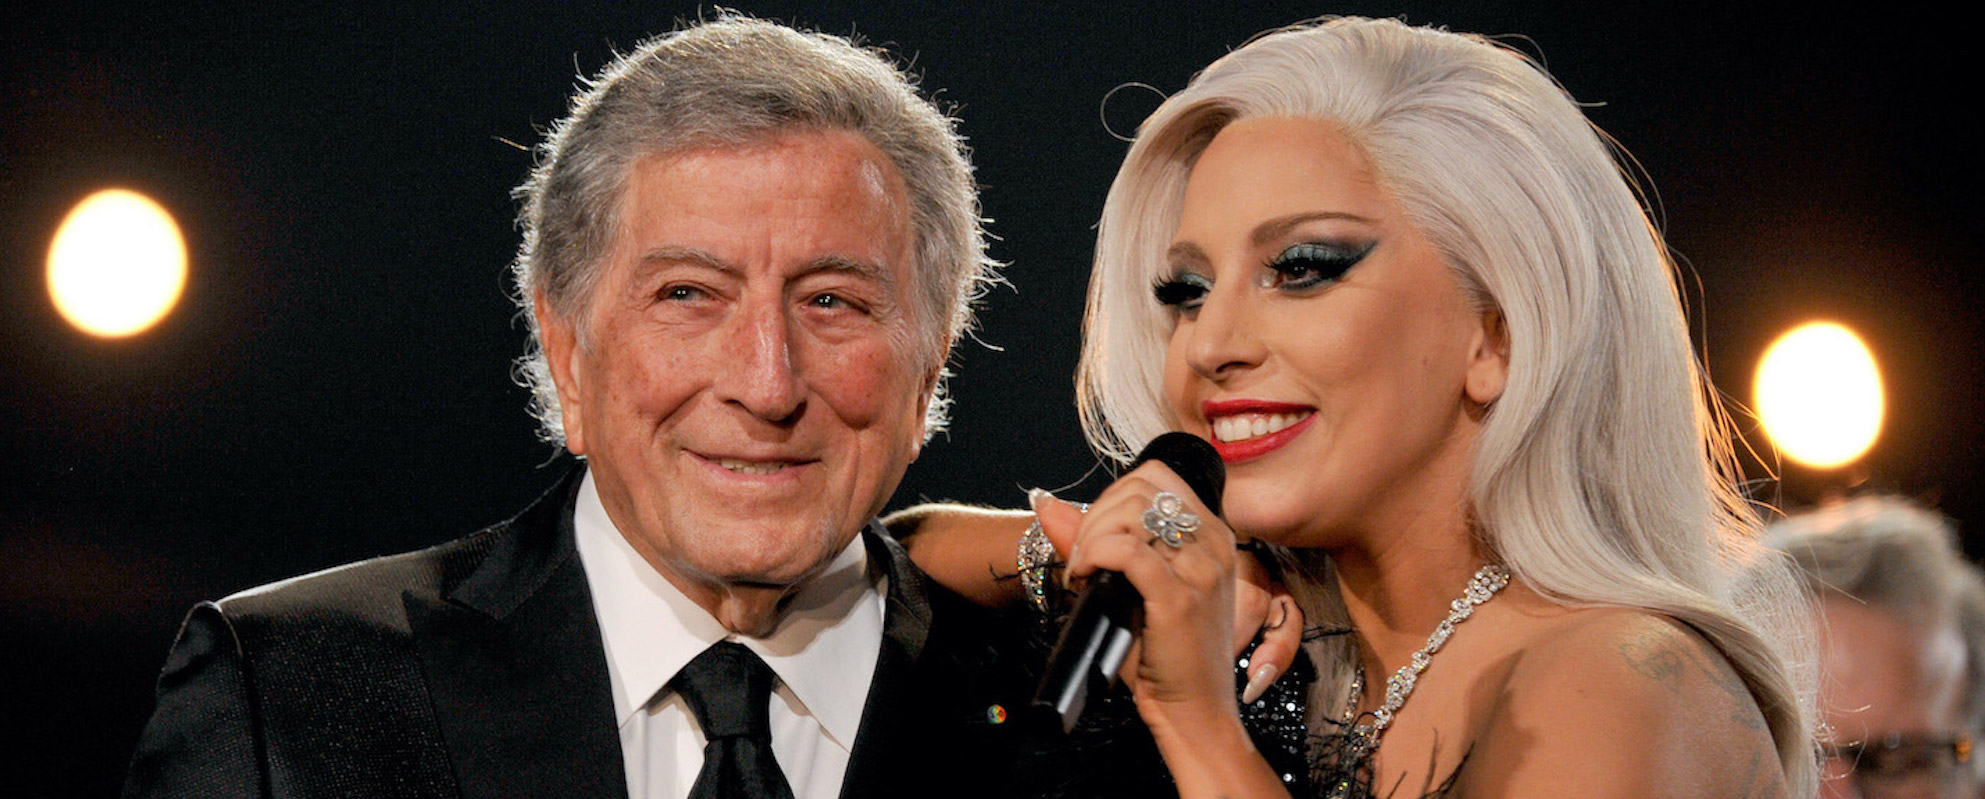 Tony Bennett Earns Fifth Guinness World Record for Work with Lady Gaga